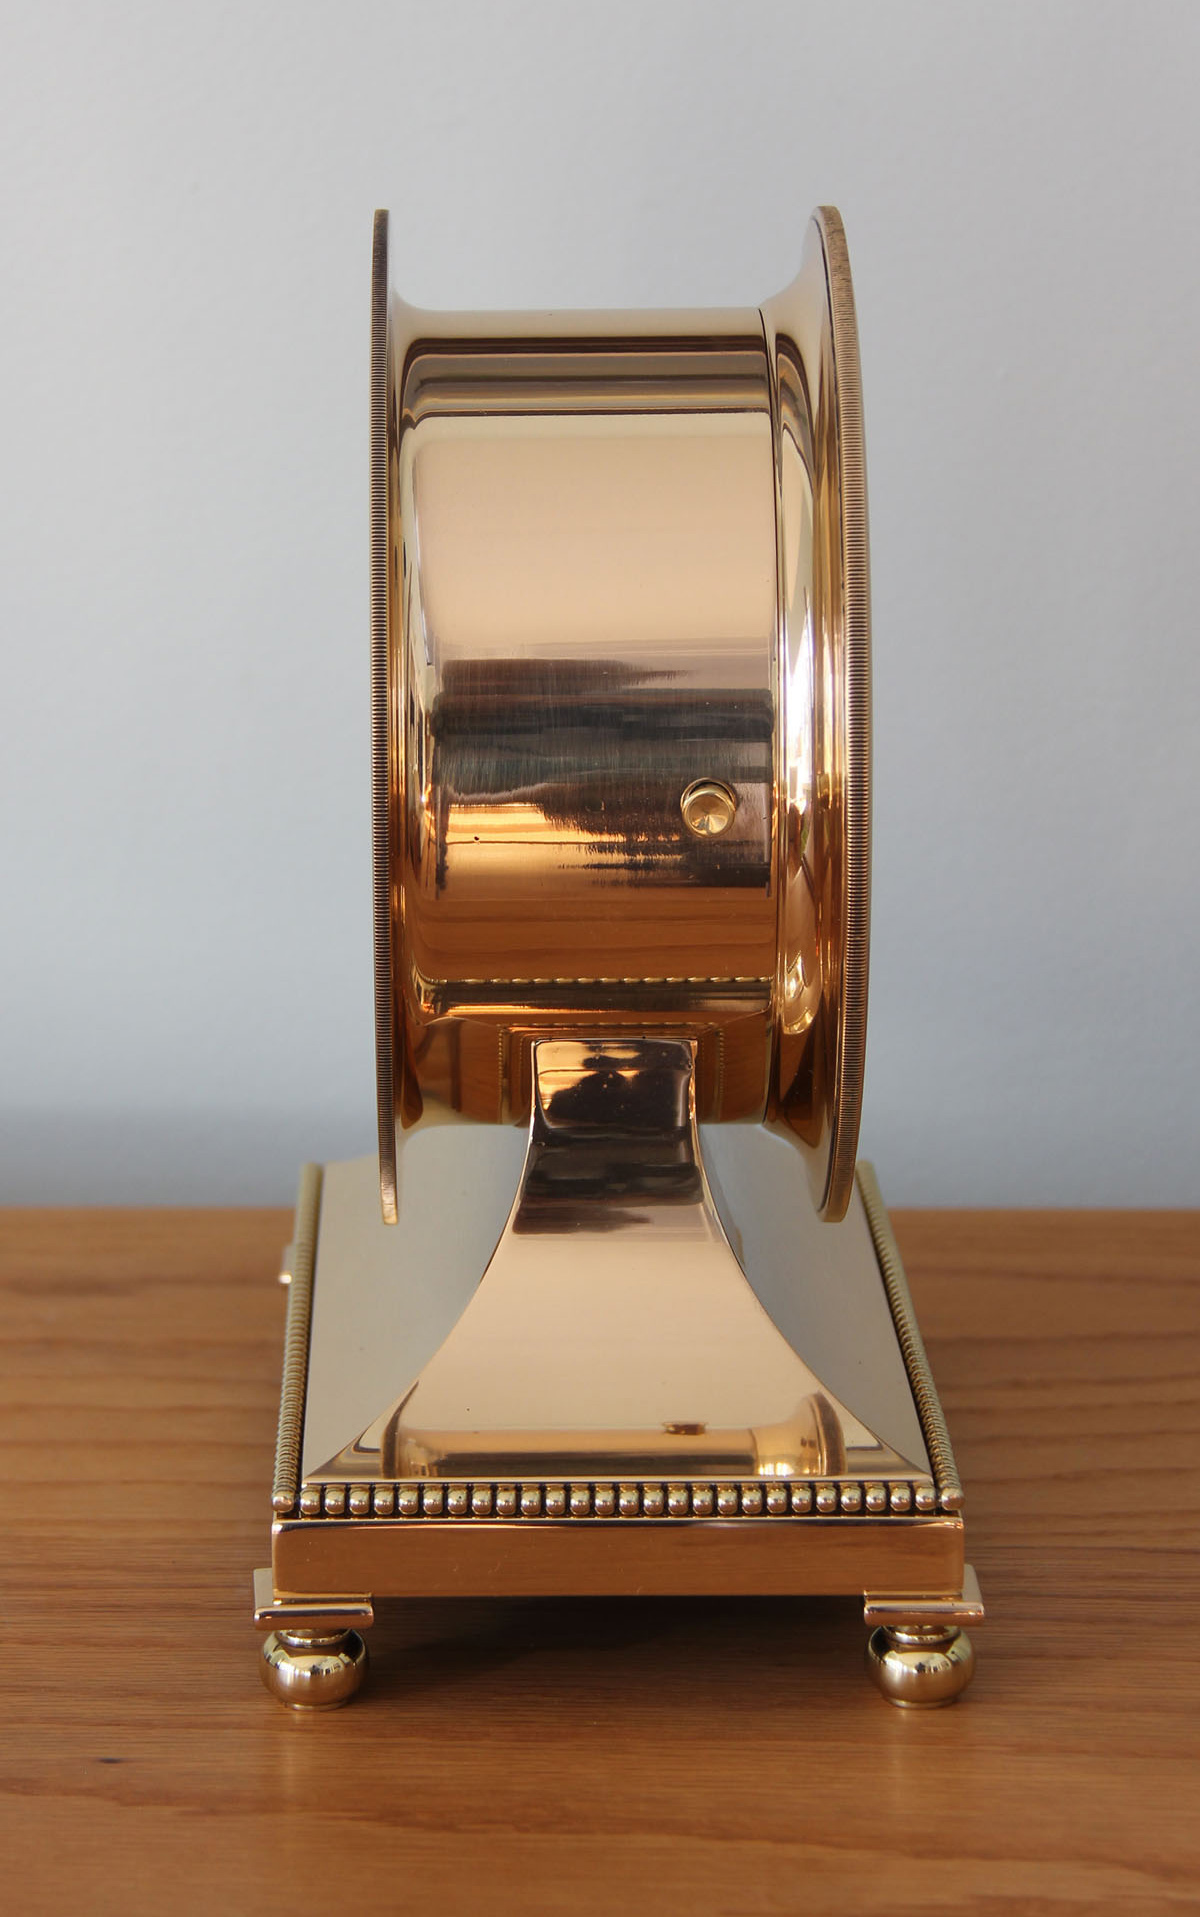 Chelsea 6 inch Library Clock